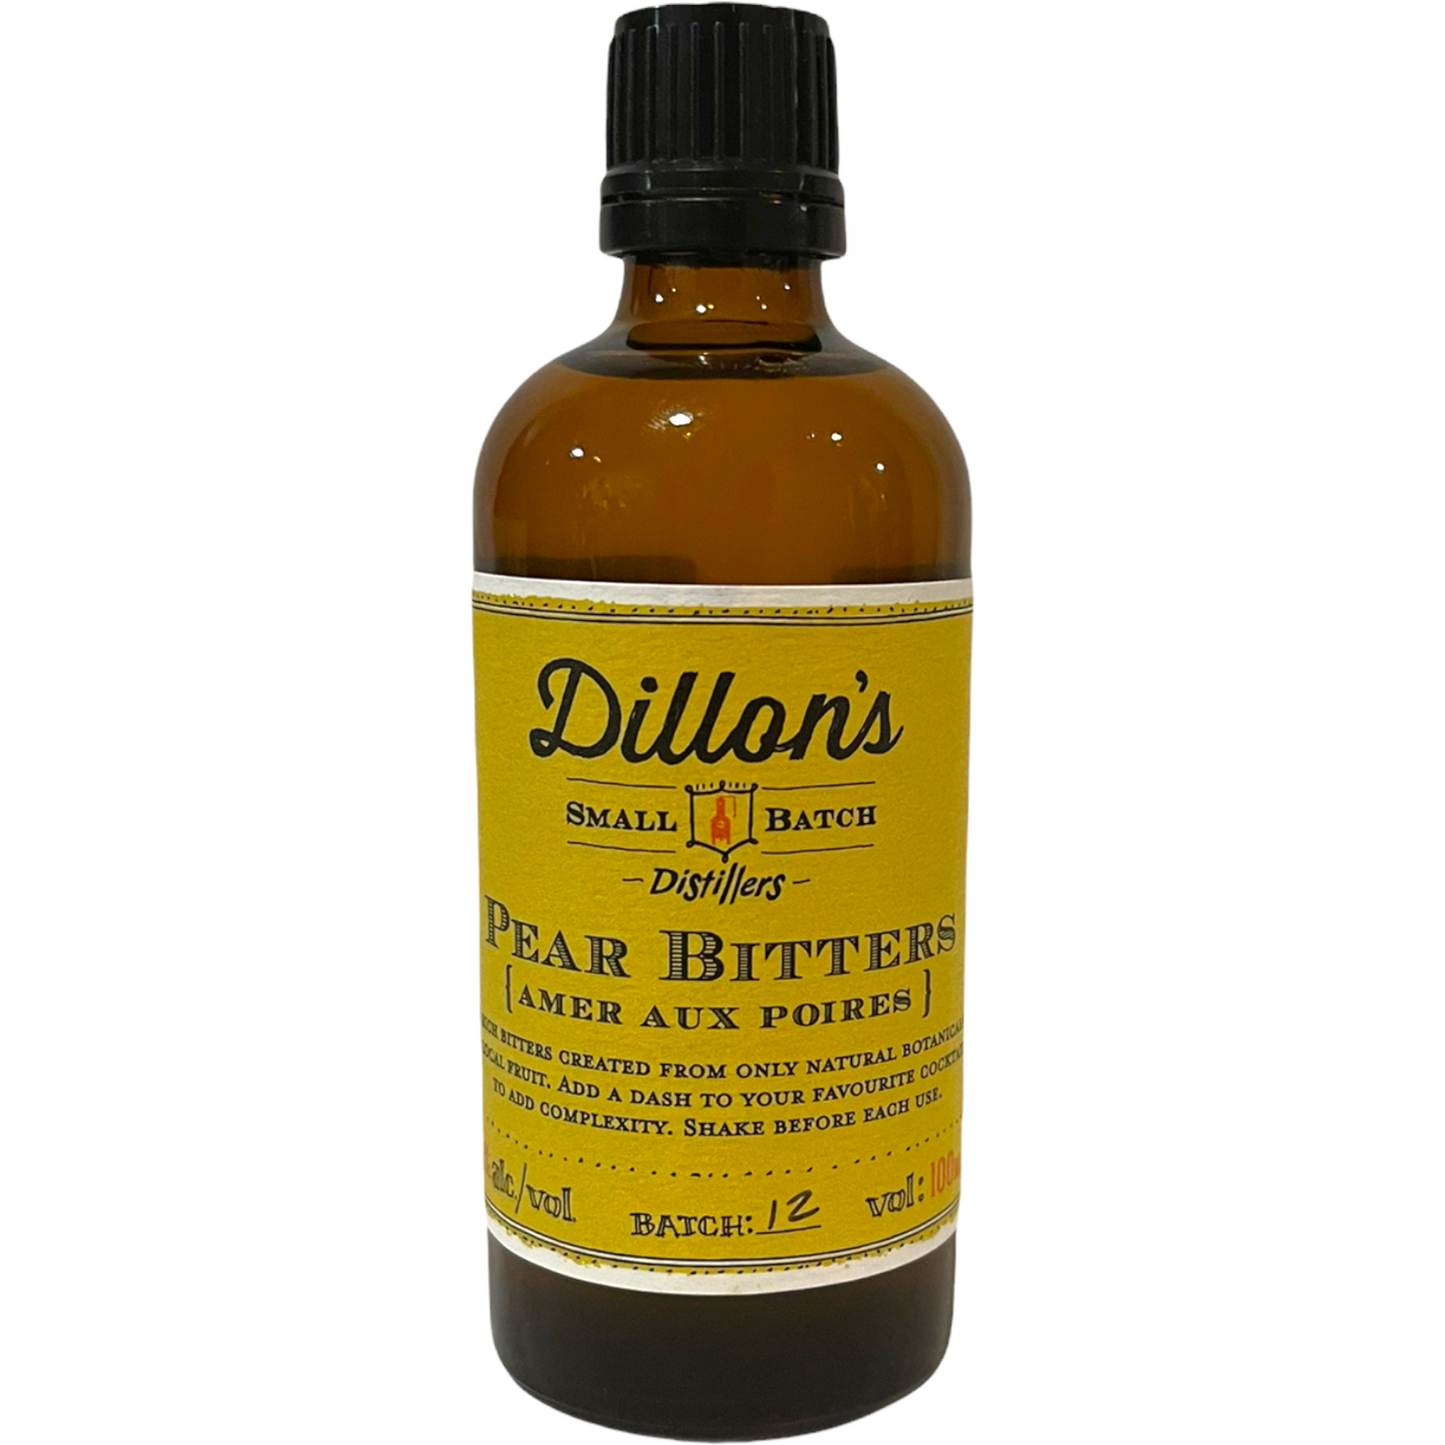 DILLON'S PEAR BITTERS